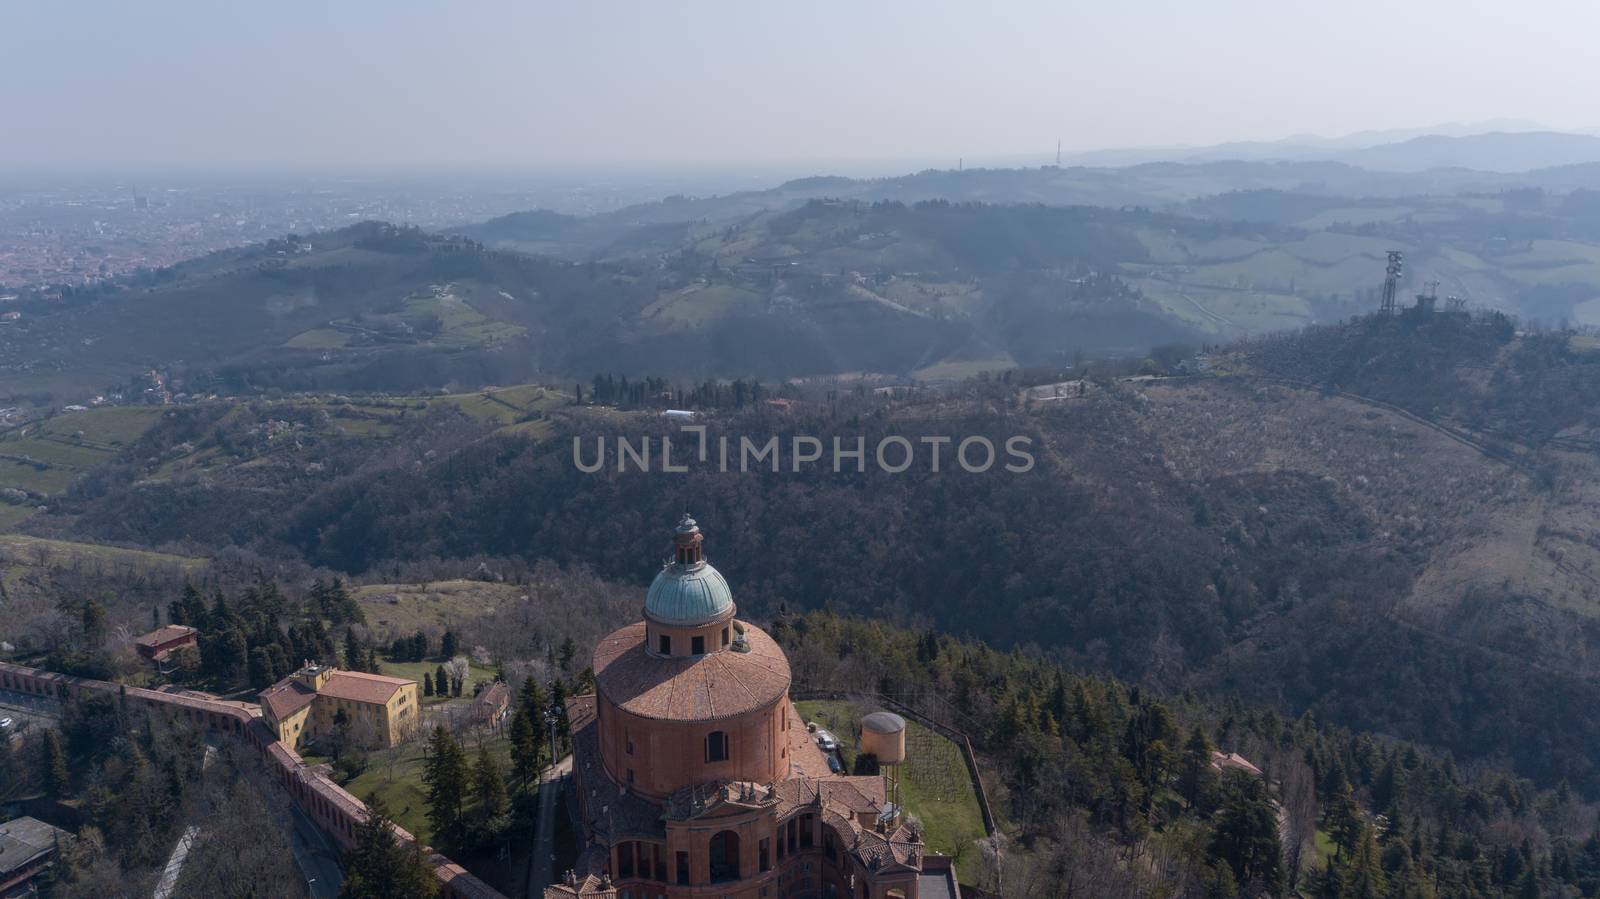 Italy Bologna city landscape aerial view by desant7474